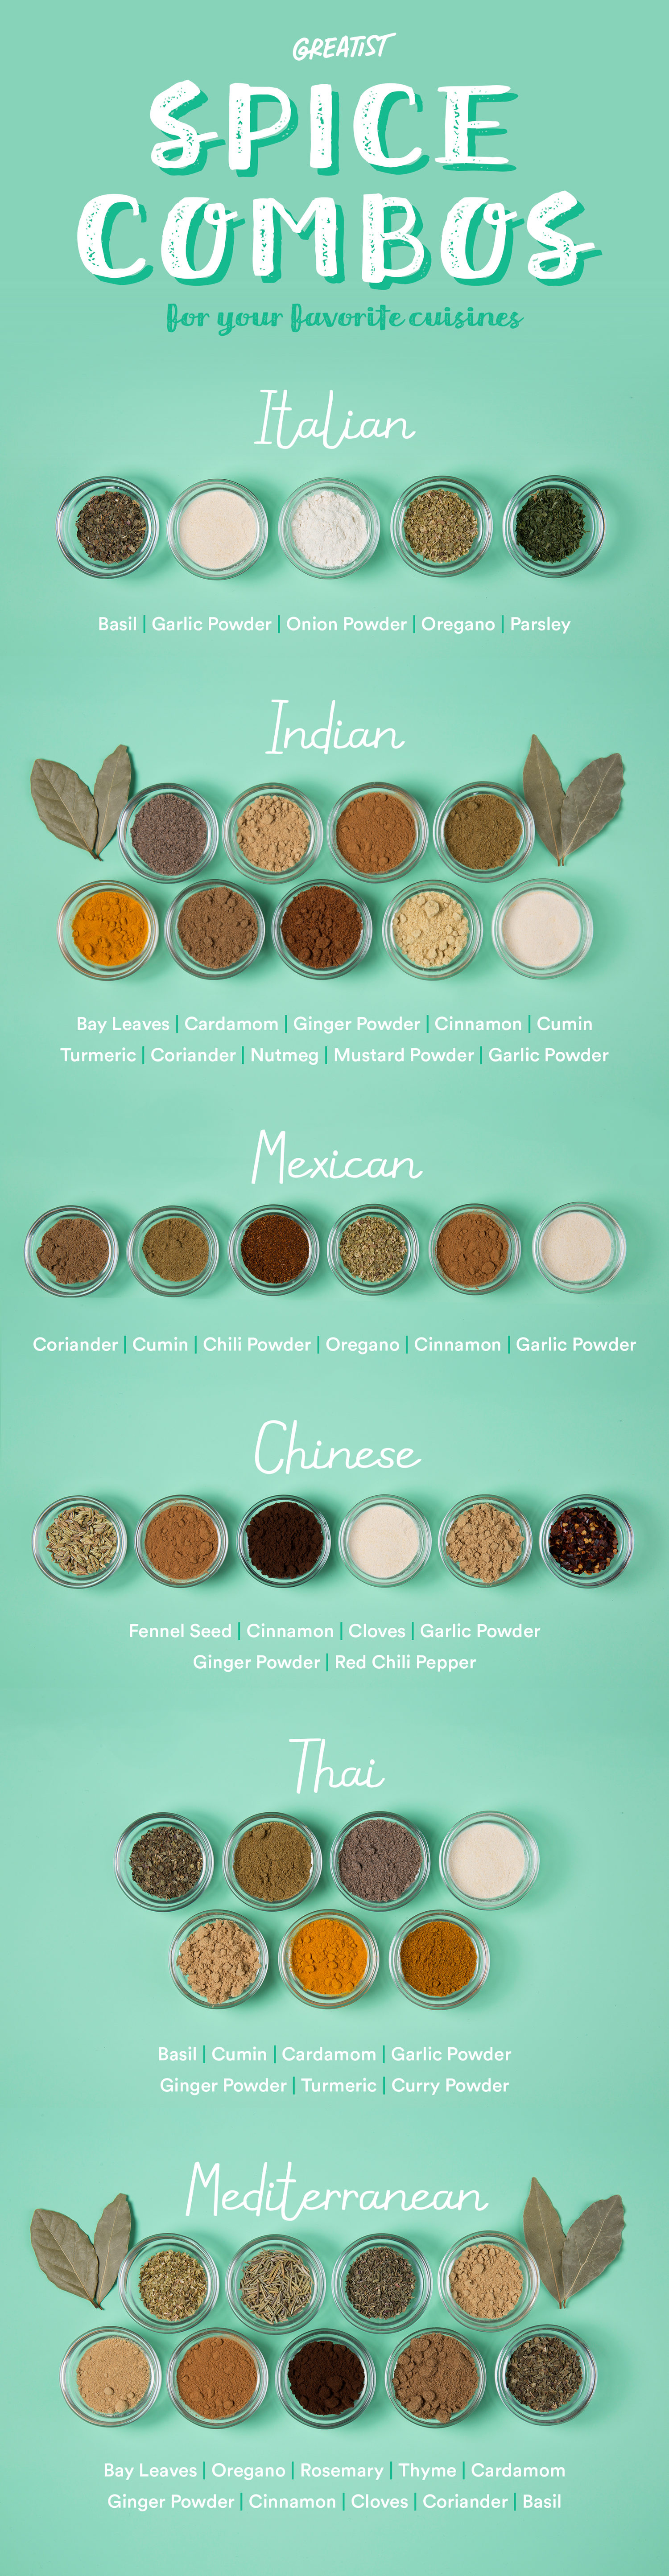 Take Your Dishes To A New Level With These Spice Combos Infographic